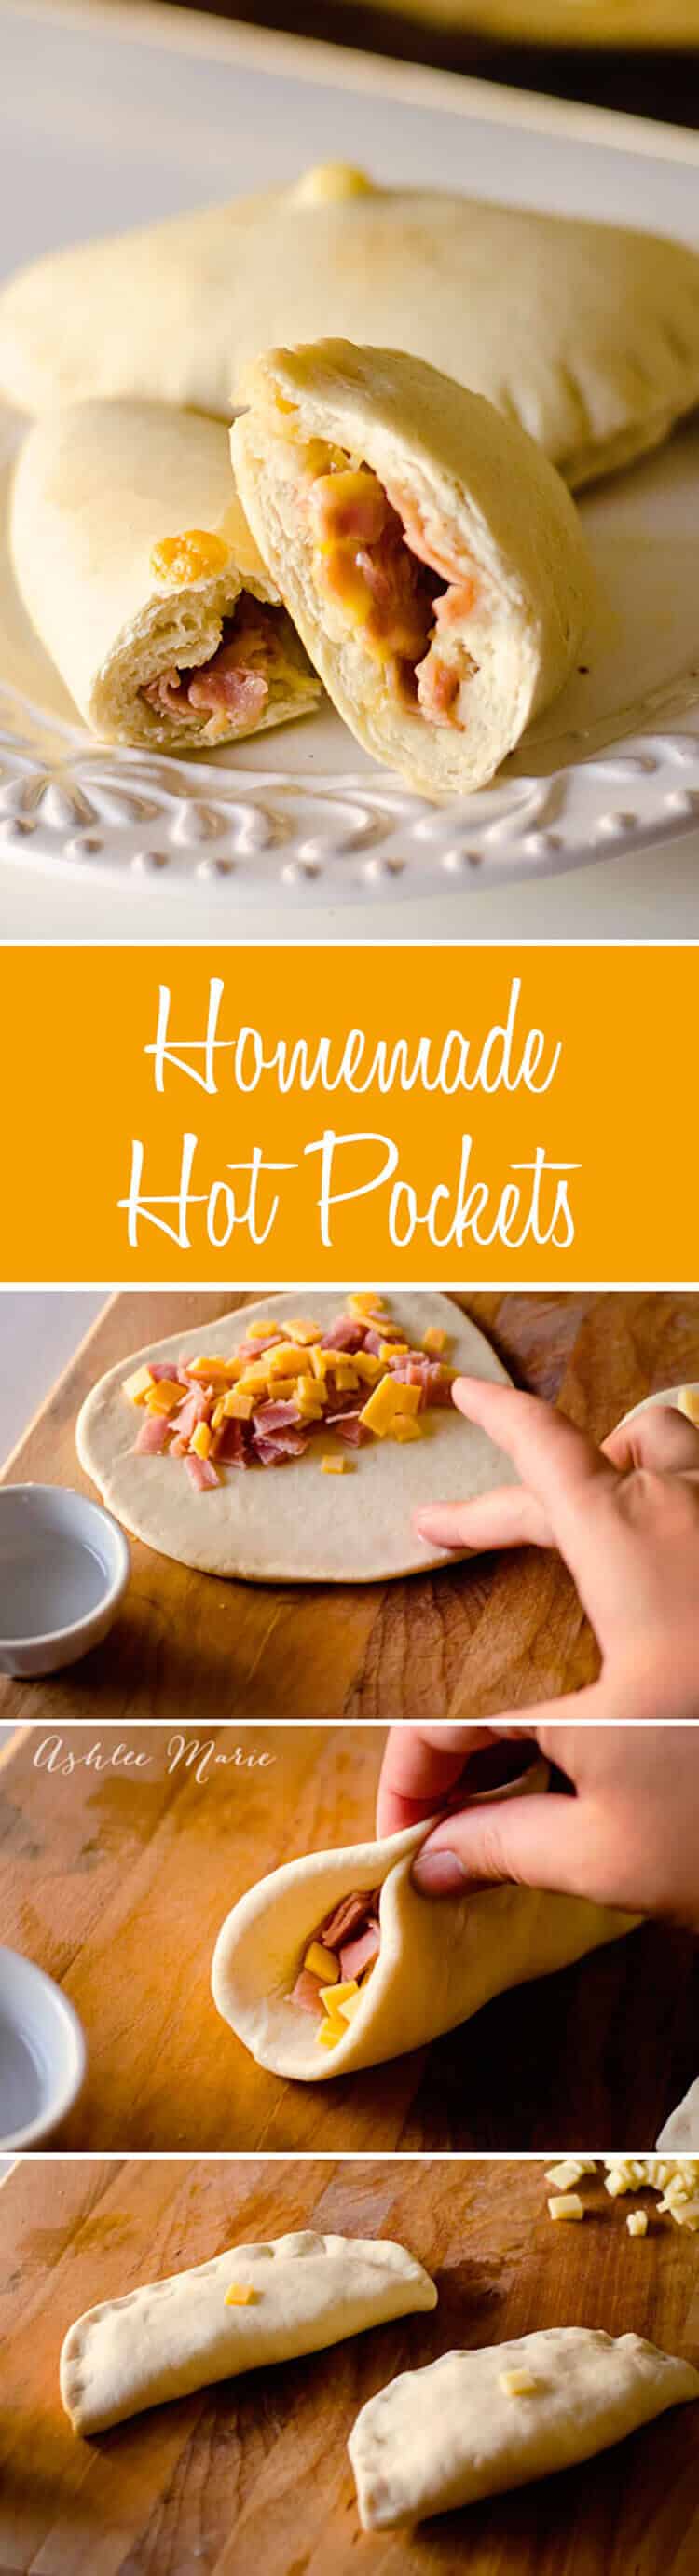 one of my kids favorite snacks are these homemade hot pockets. Fill them with any meat or cheese you like